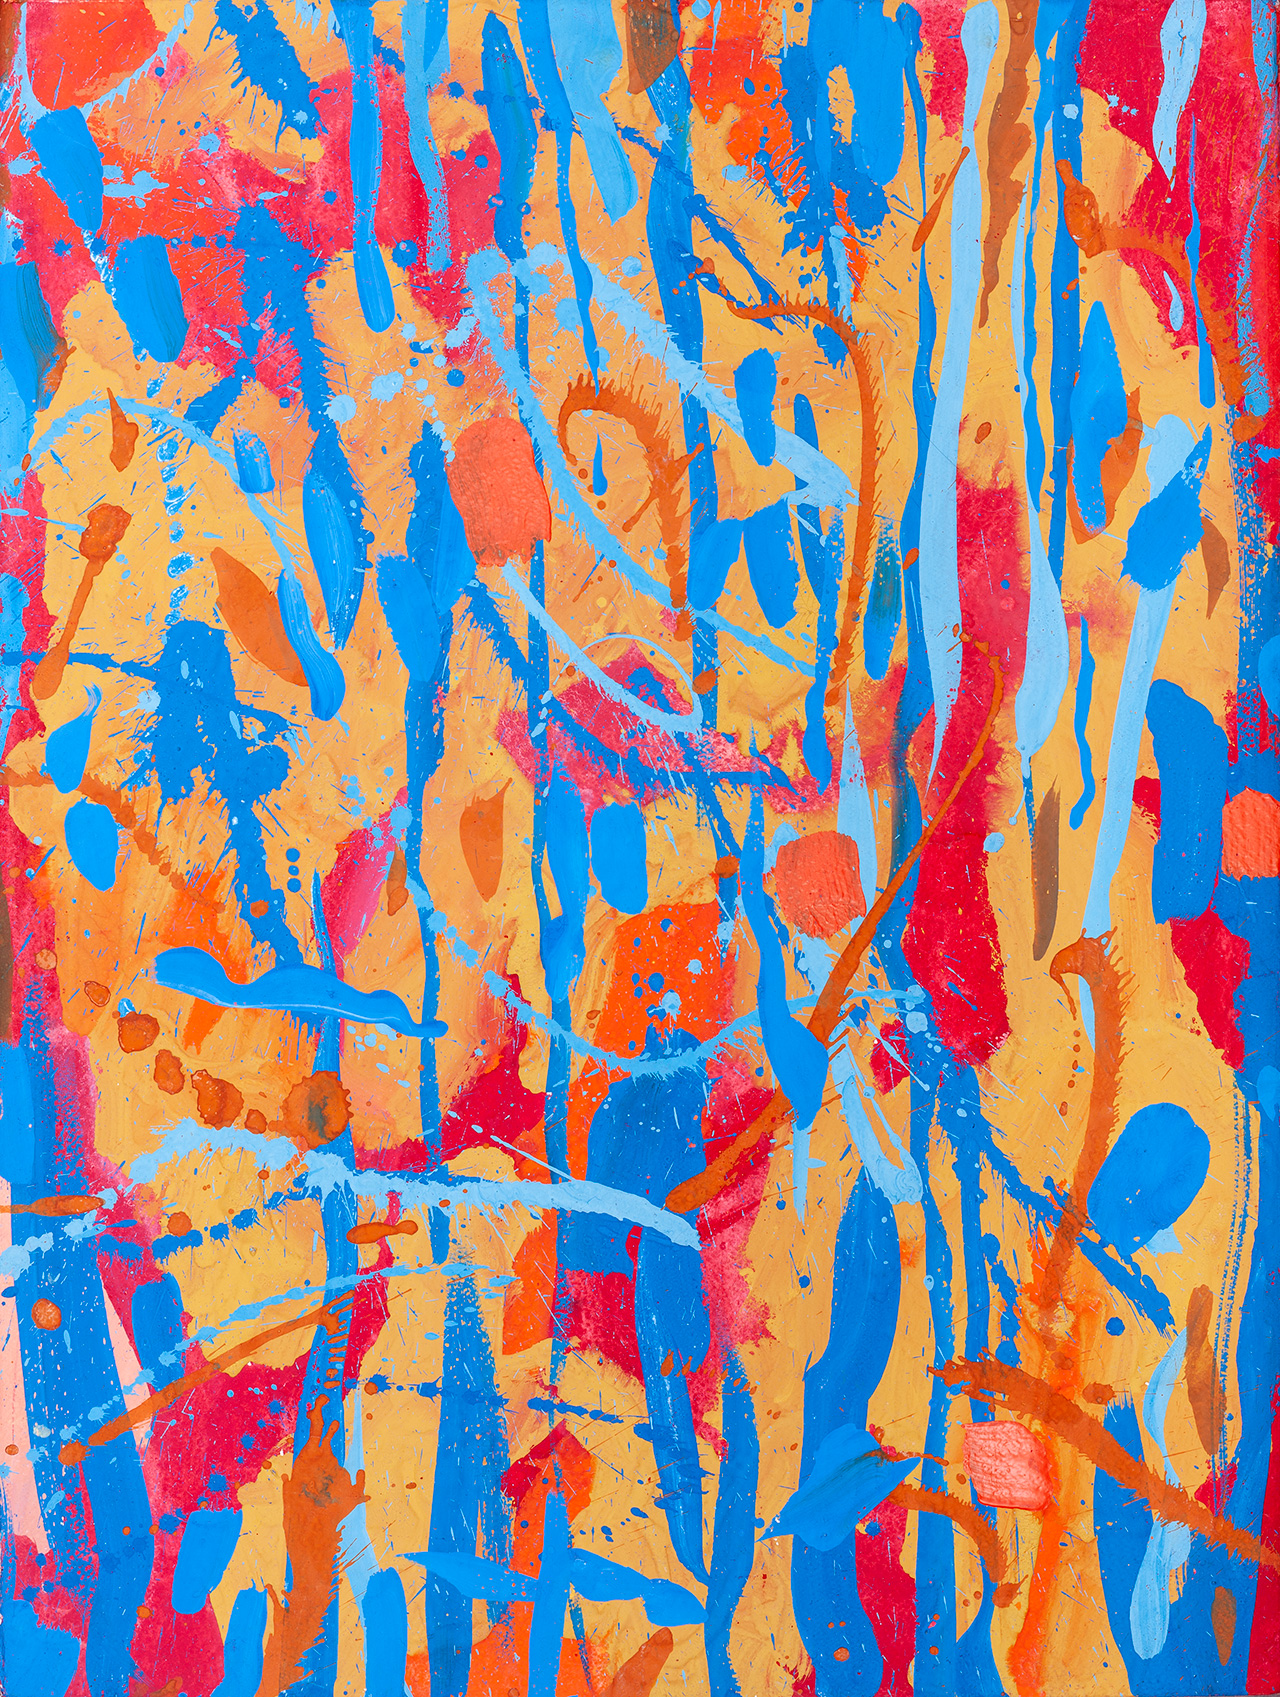 Edward Dwurnik - Abstract composition (Mixed media on paper | Size: 58 x 77 cm | Price: 26000 PLN)